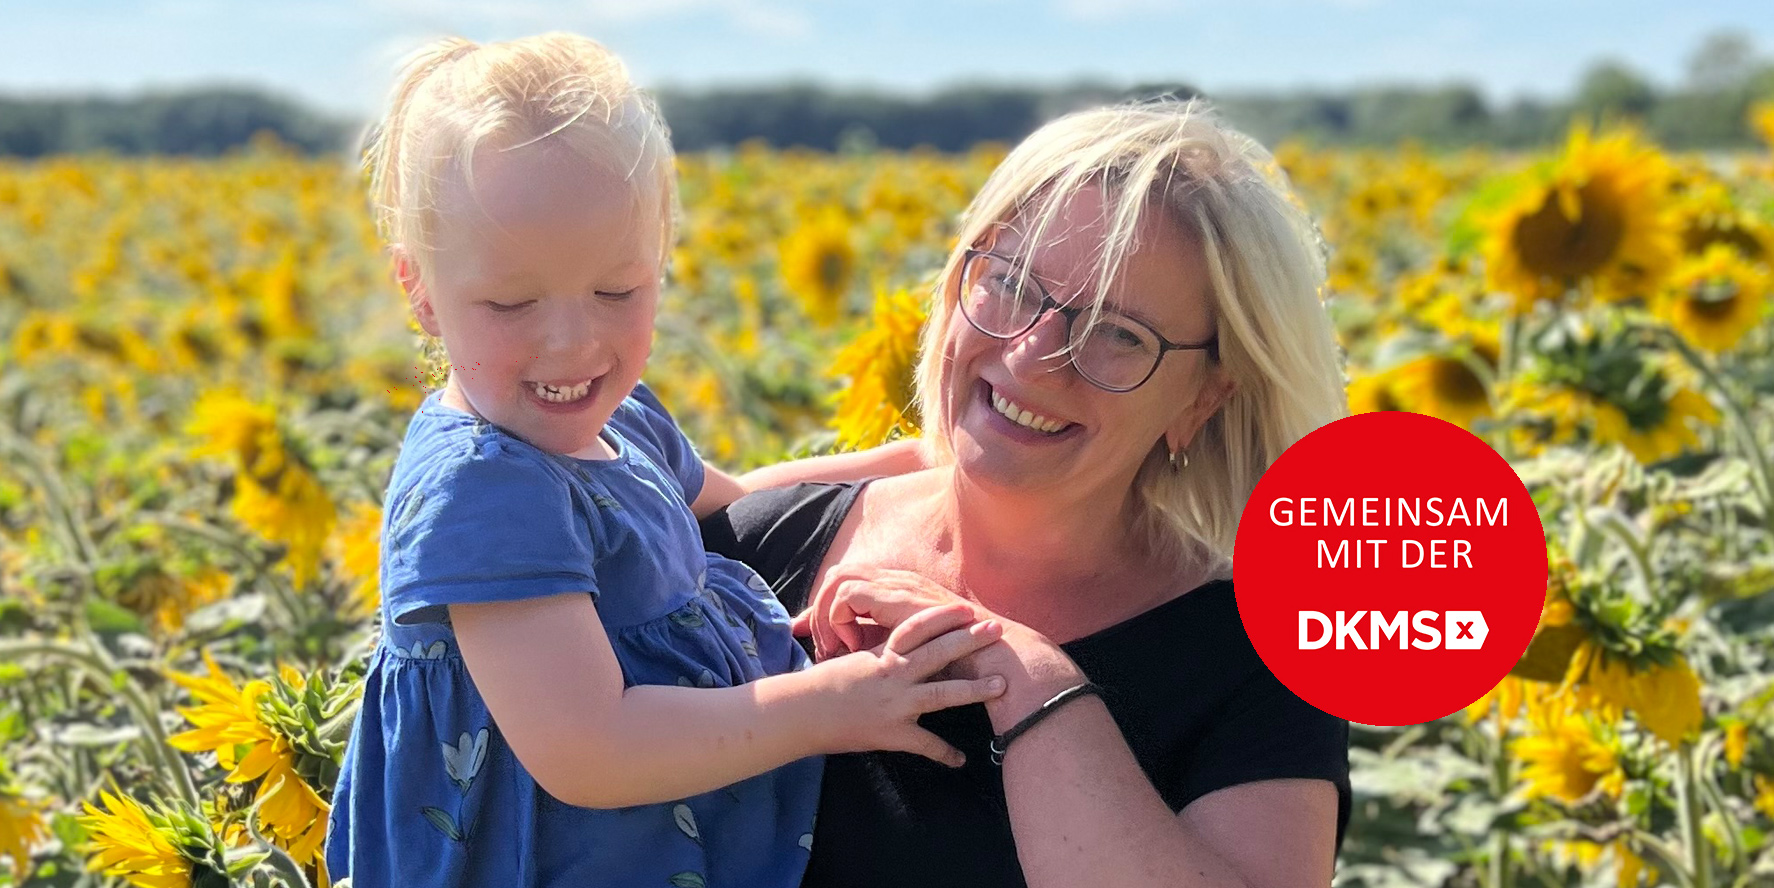 The stem cell donation for our colleague Doreen Oerter has been made. Now she can hopefully spend time with her granddaughter again as soon as possible.